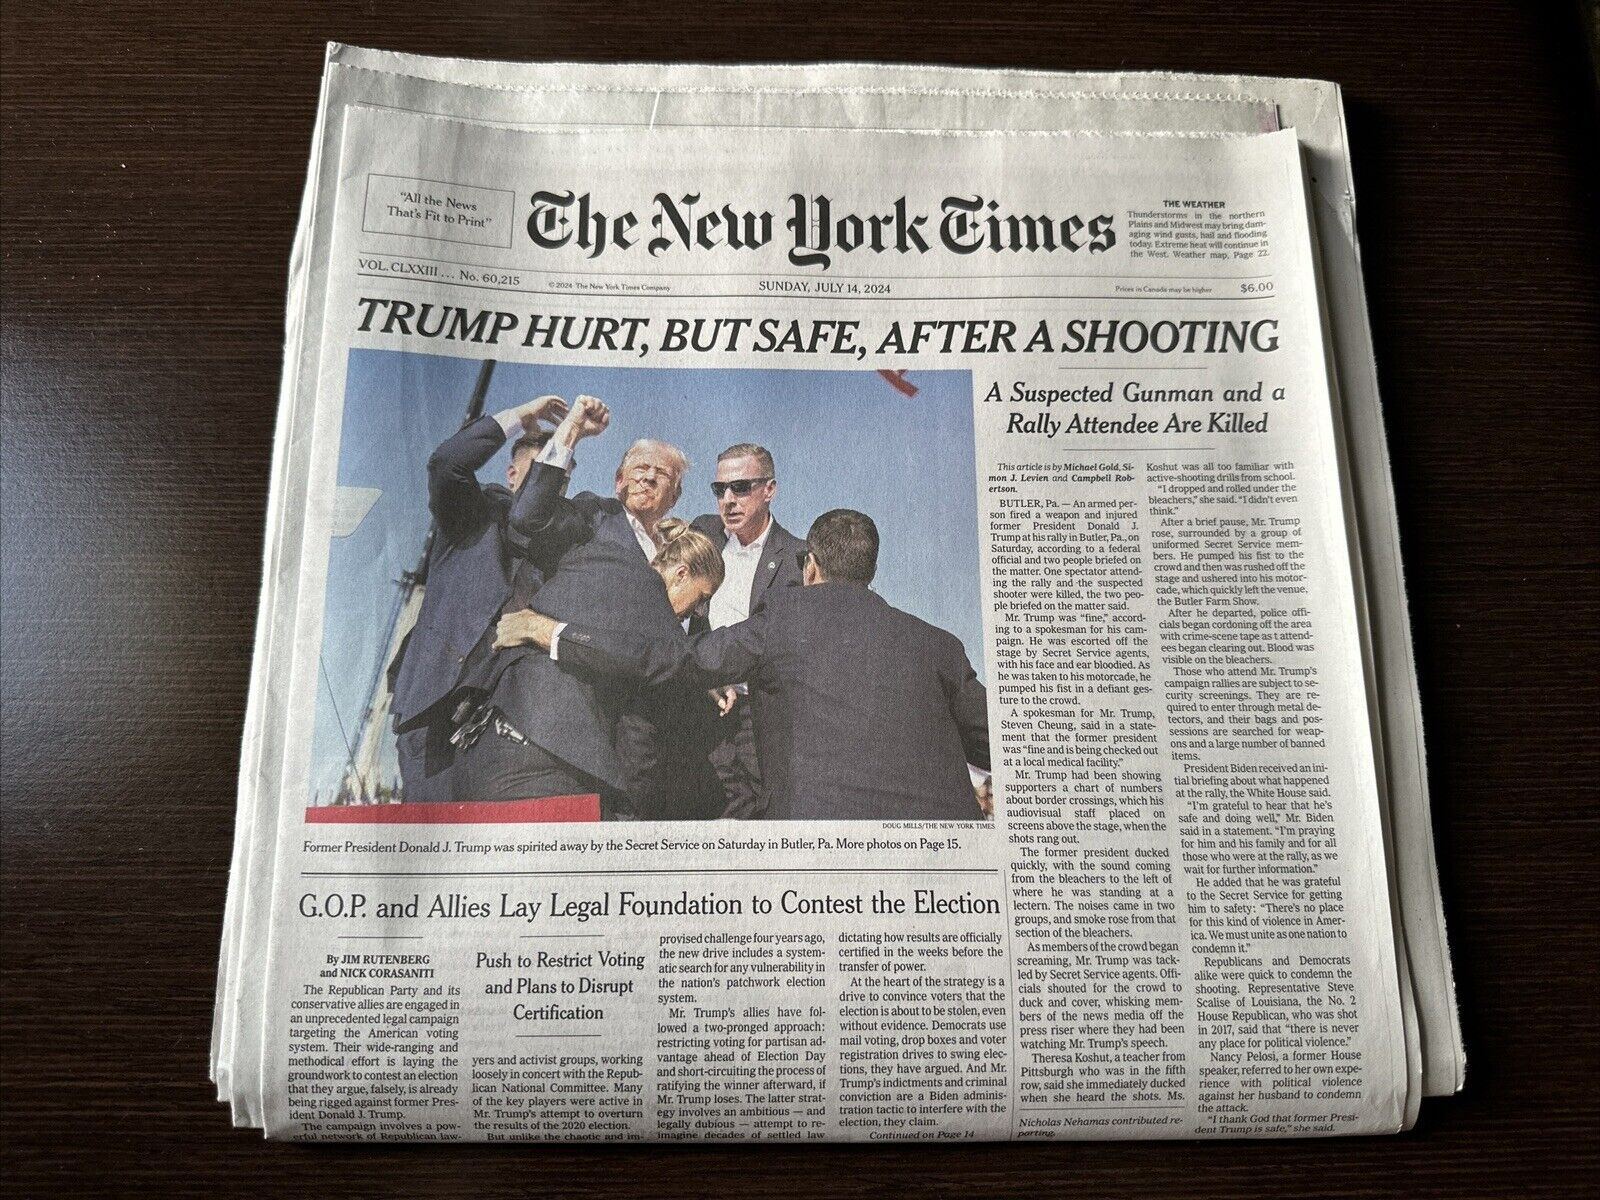 The New York Times July 14 2024, Donald Trump Hurt After Shooting. Newspaper.